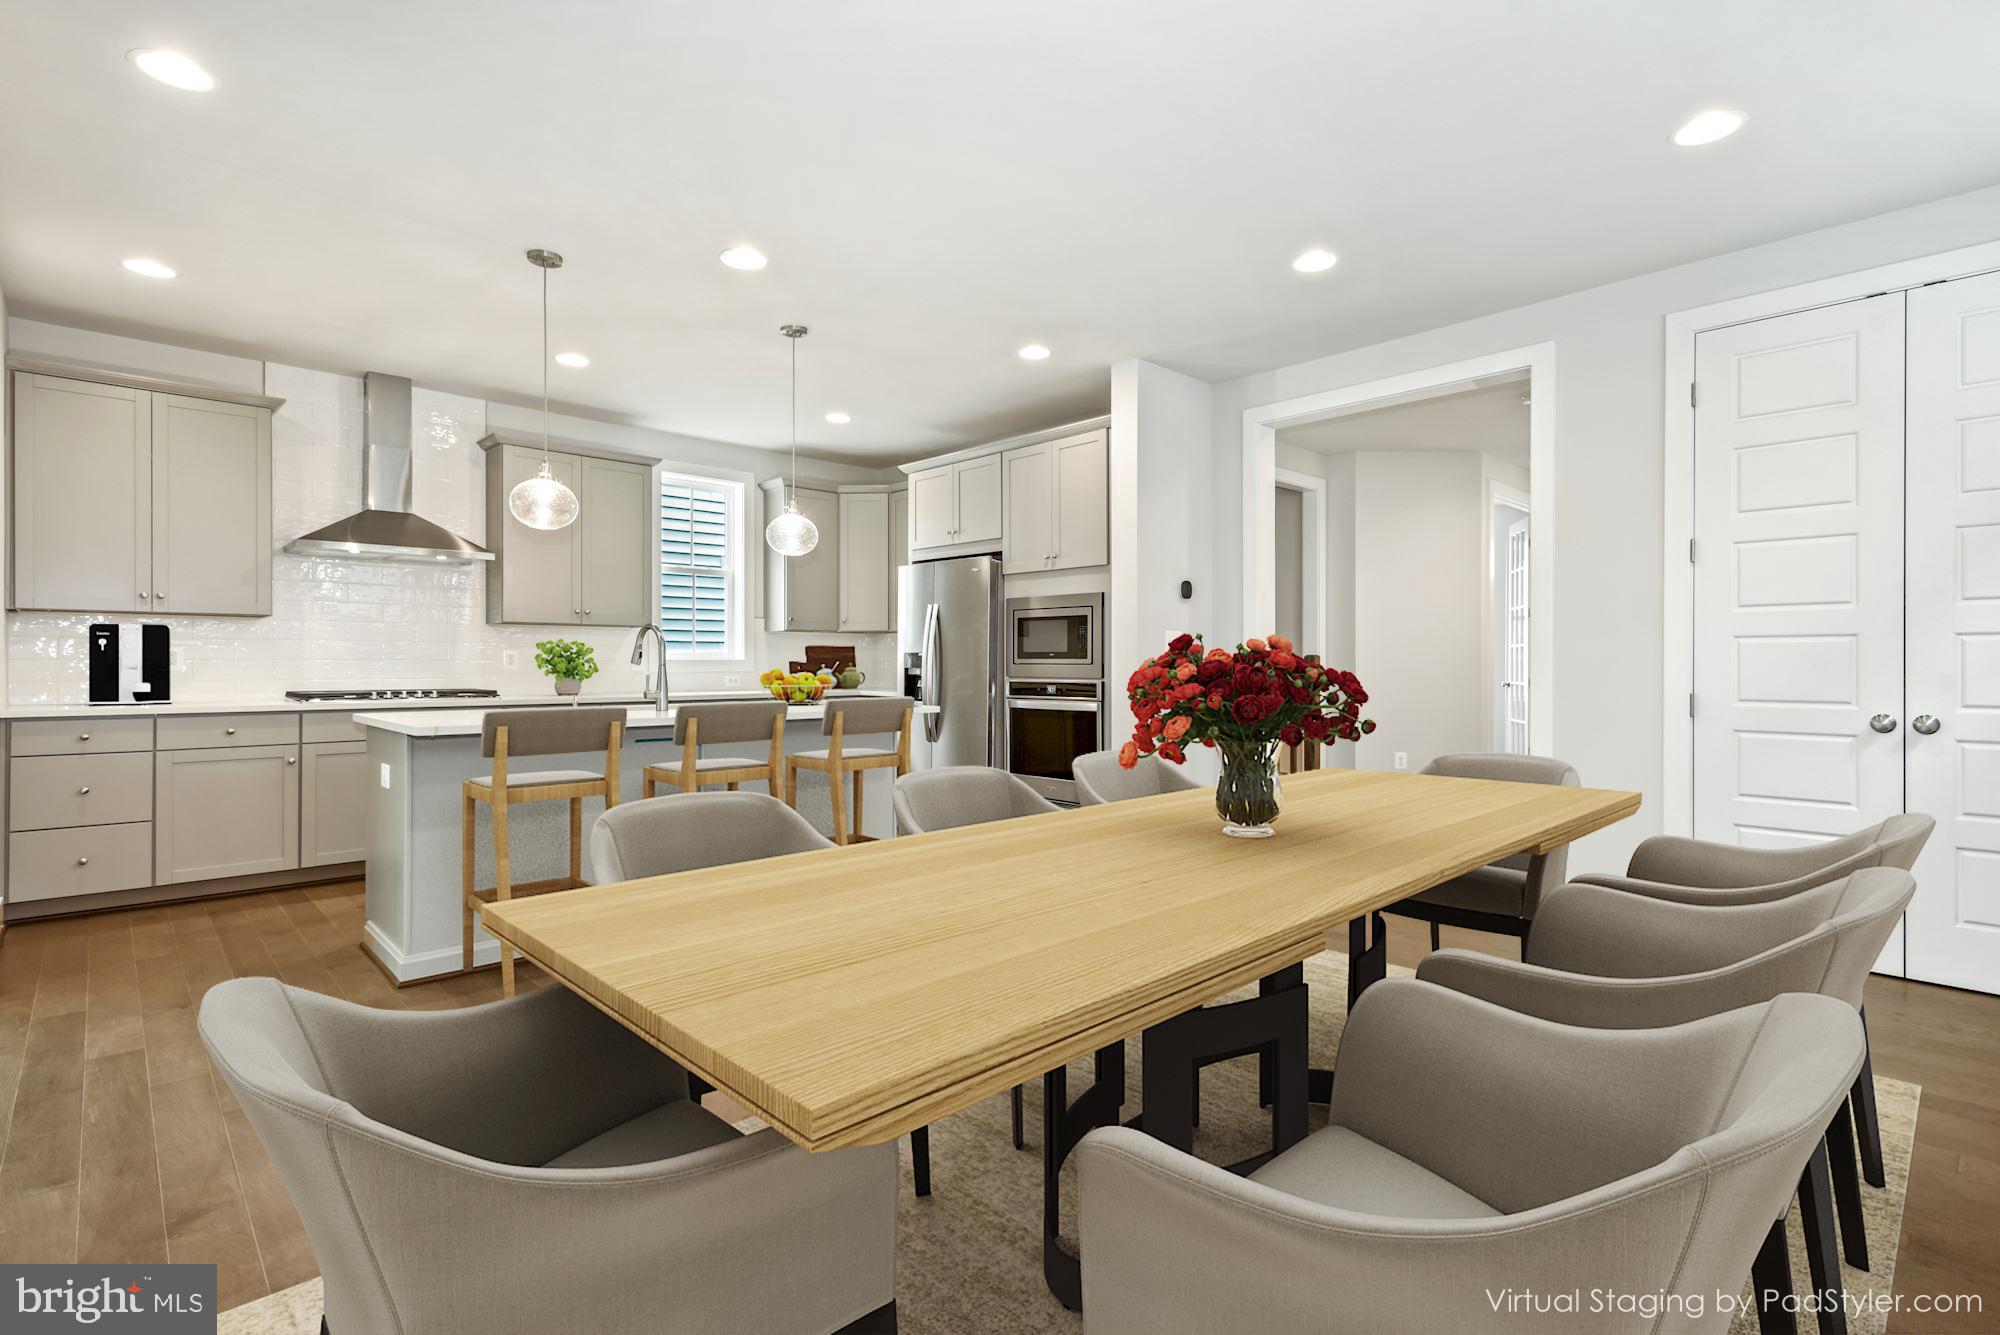 a living room with stainless steel appliances furniture a dining table and kitchen view